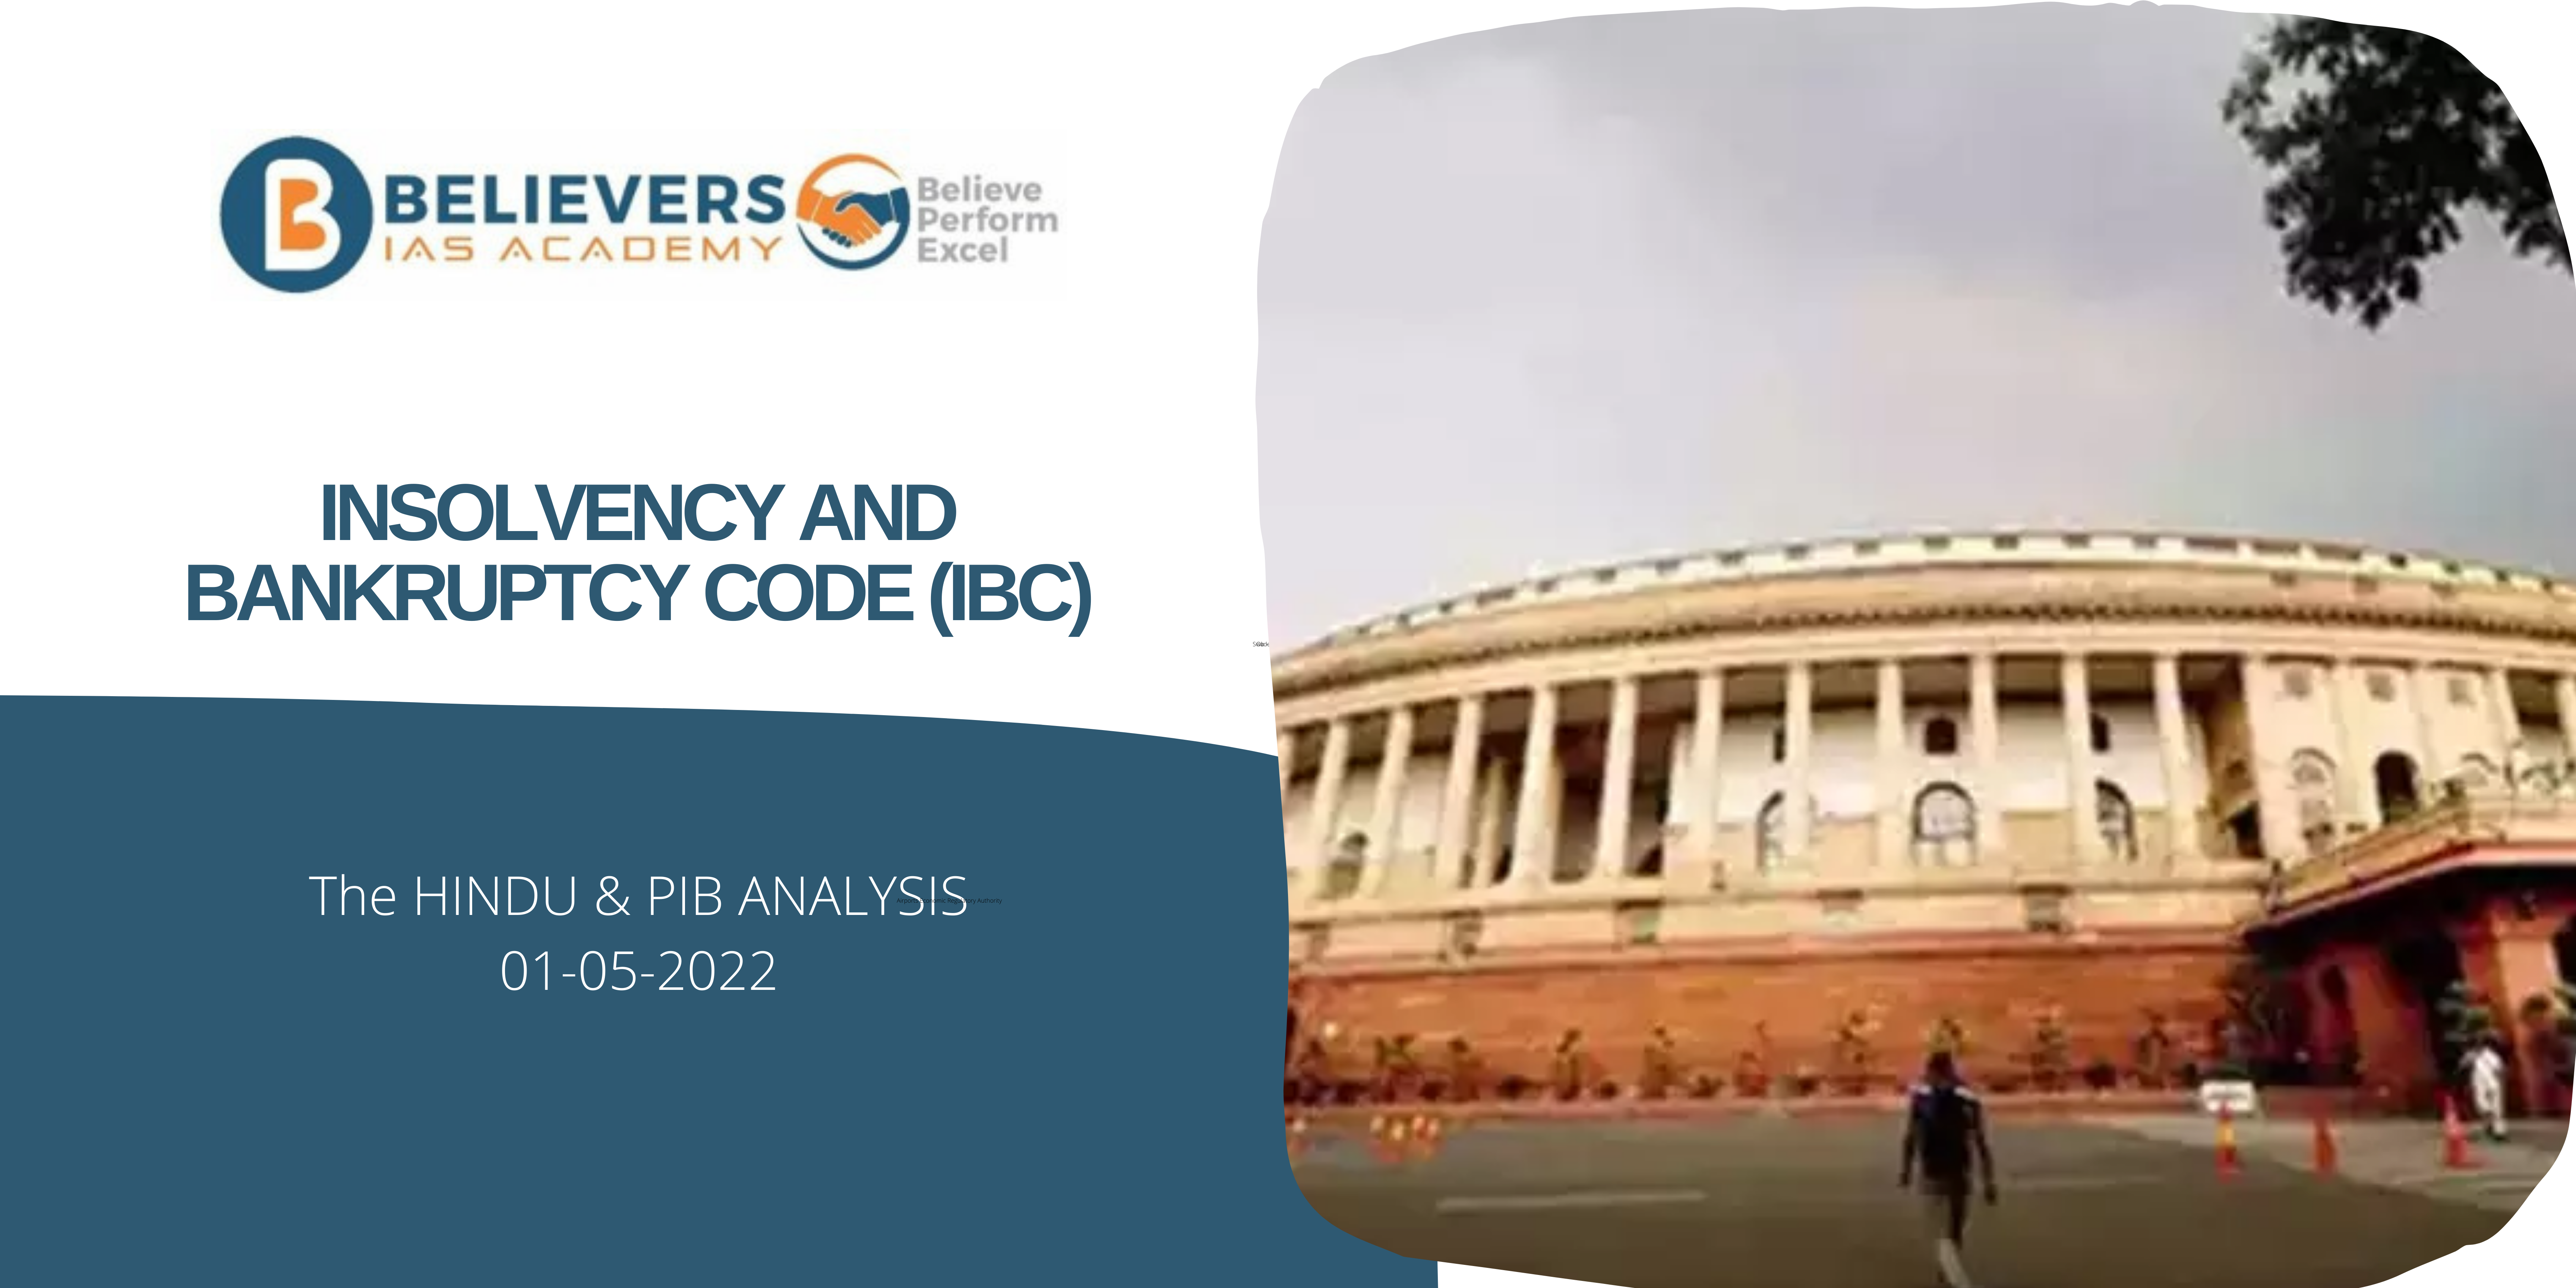 UPSC Current affairs - Insolvency and Bankruptcy Code (IBC)